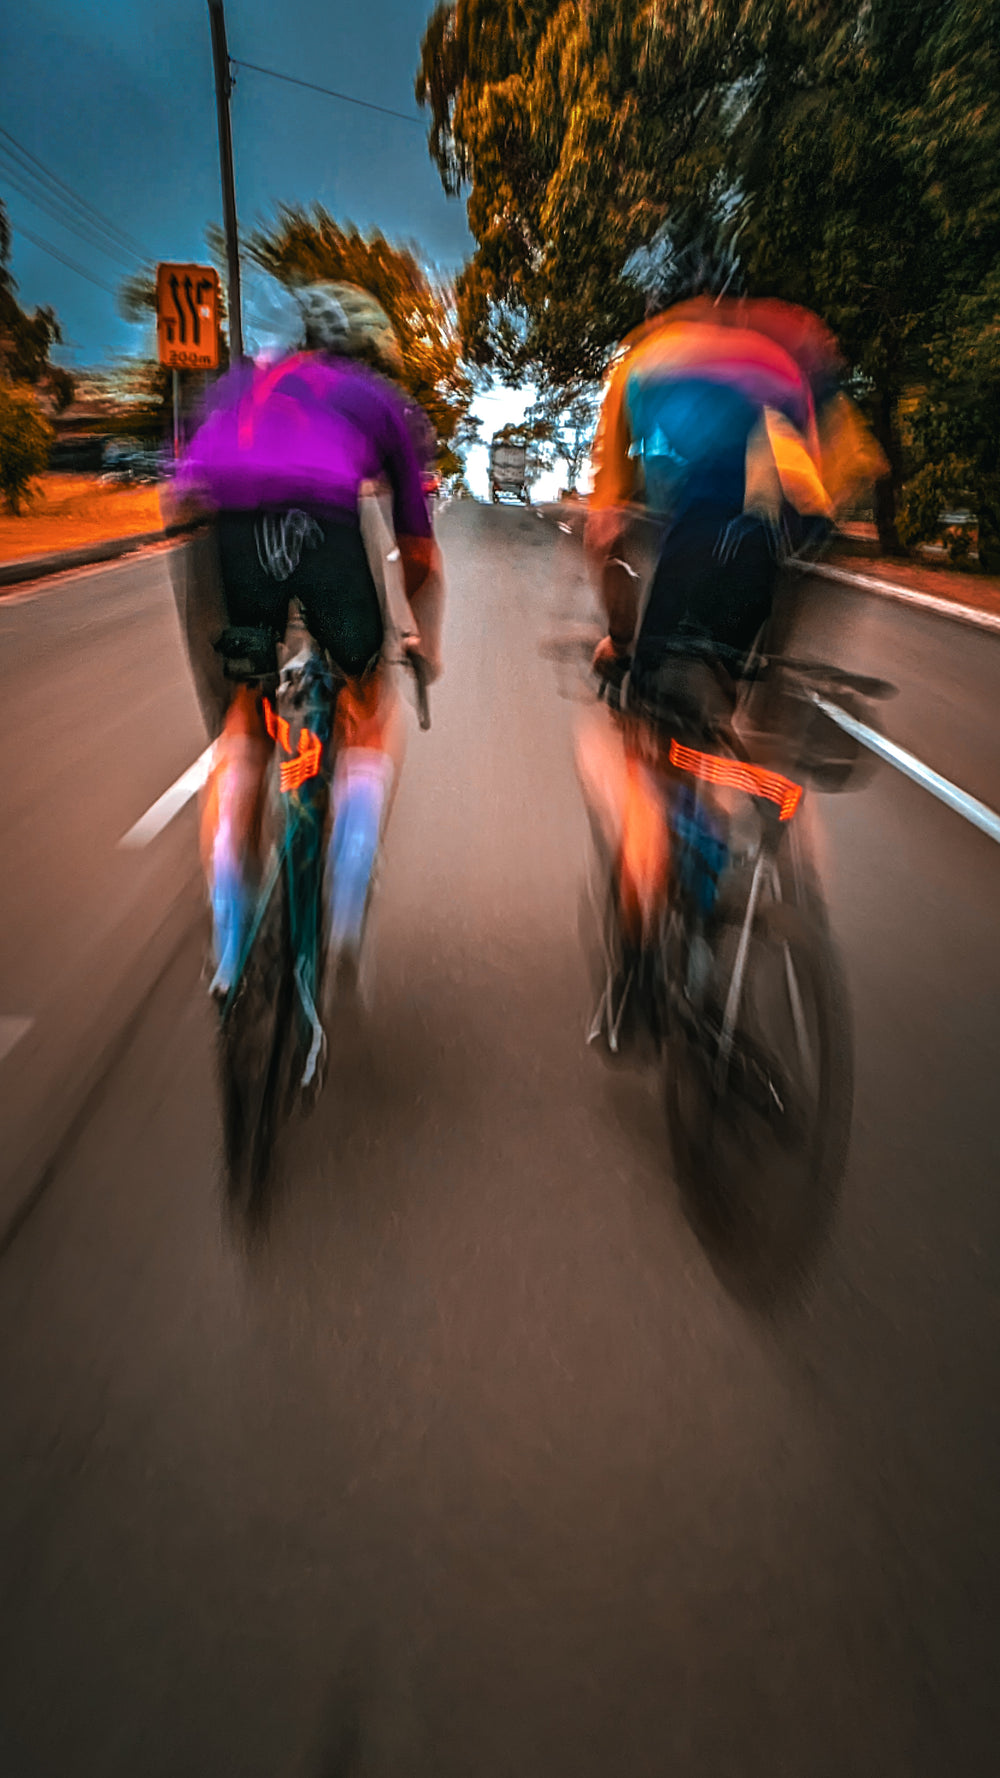 Two cyclists wearing sustainable, premium Aero-Fit cycling clothing ride side by side, their motion creating a blur effect in the background as they move at a high speed. The clothing is designed to improve performance and reduce environmental impact